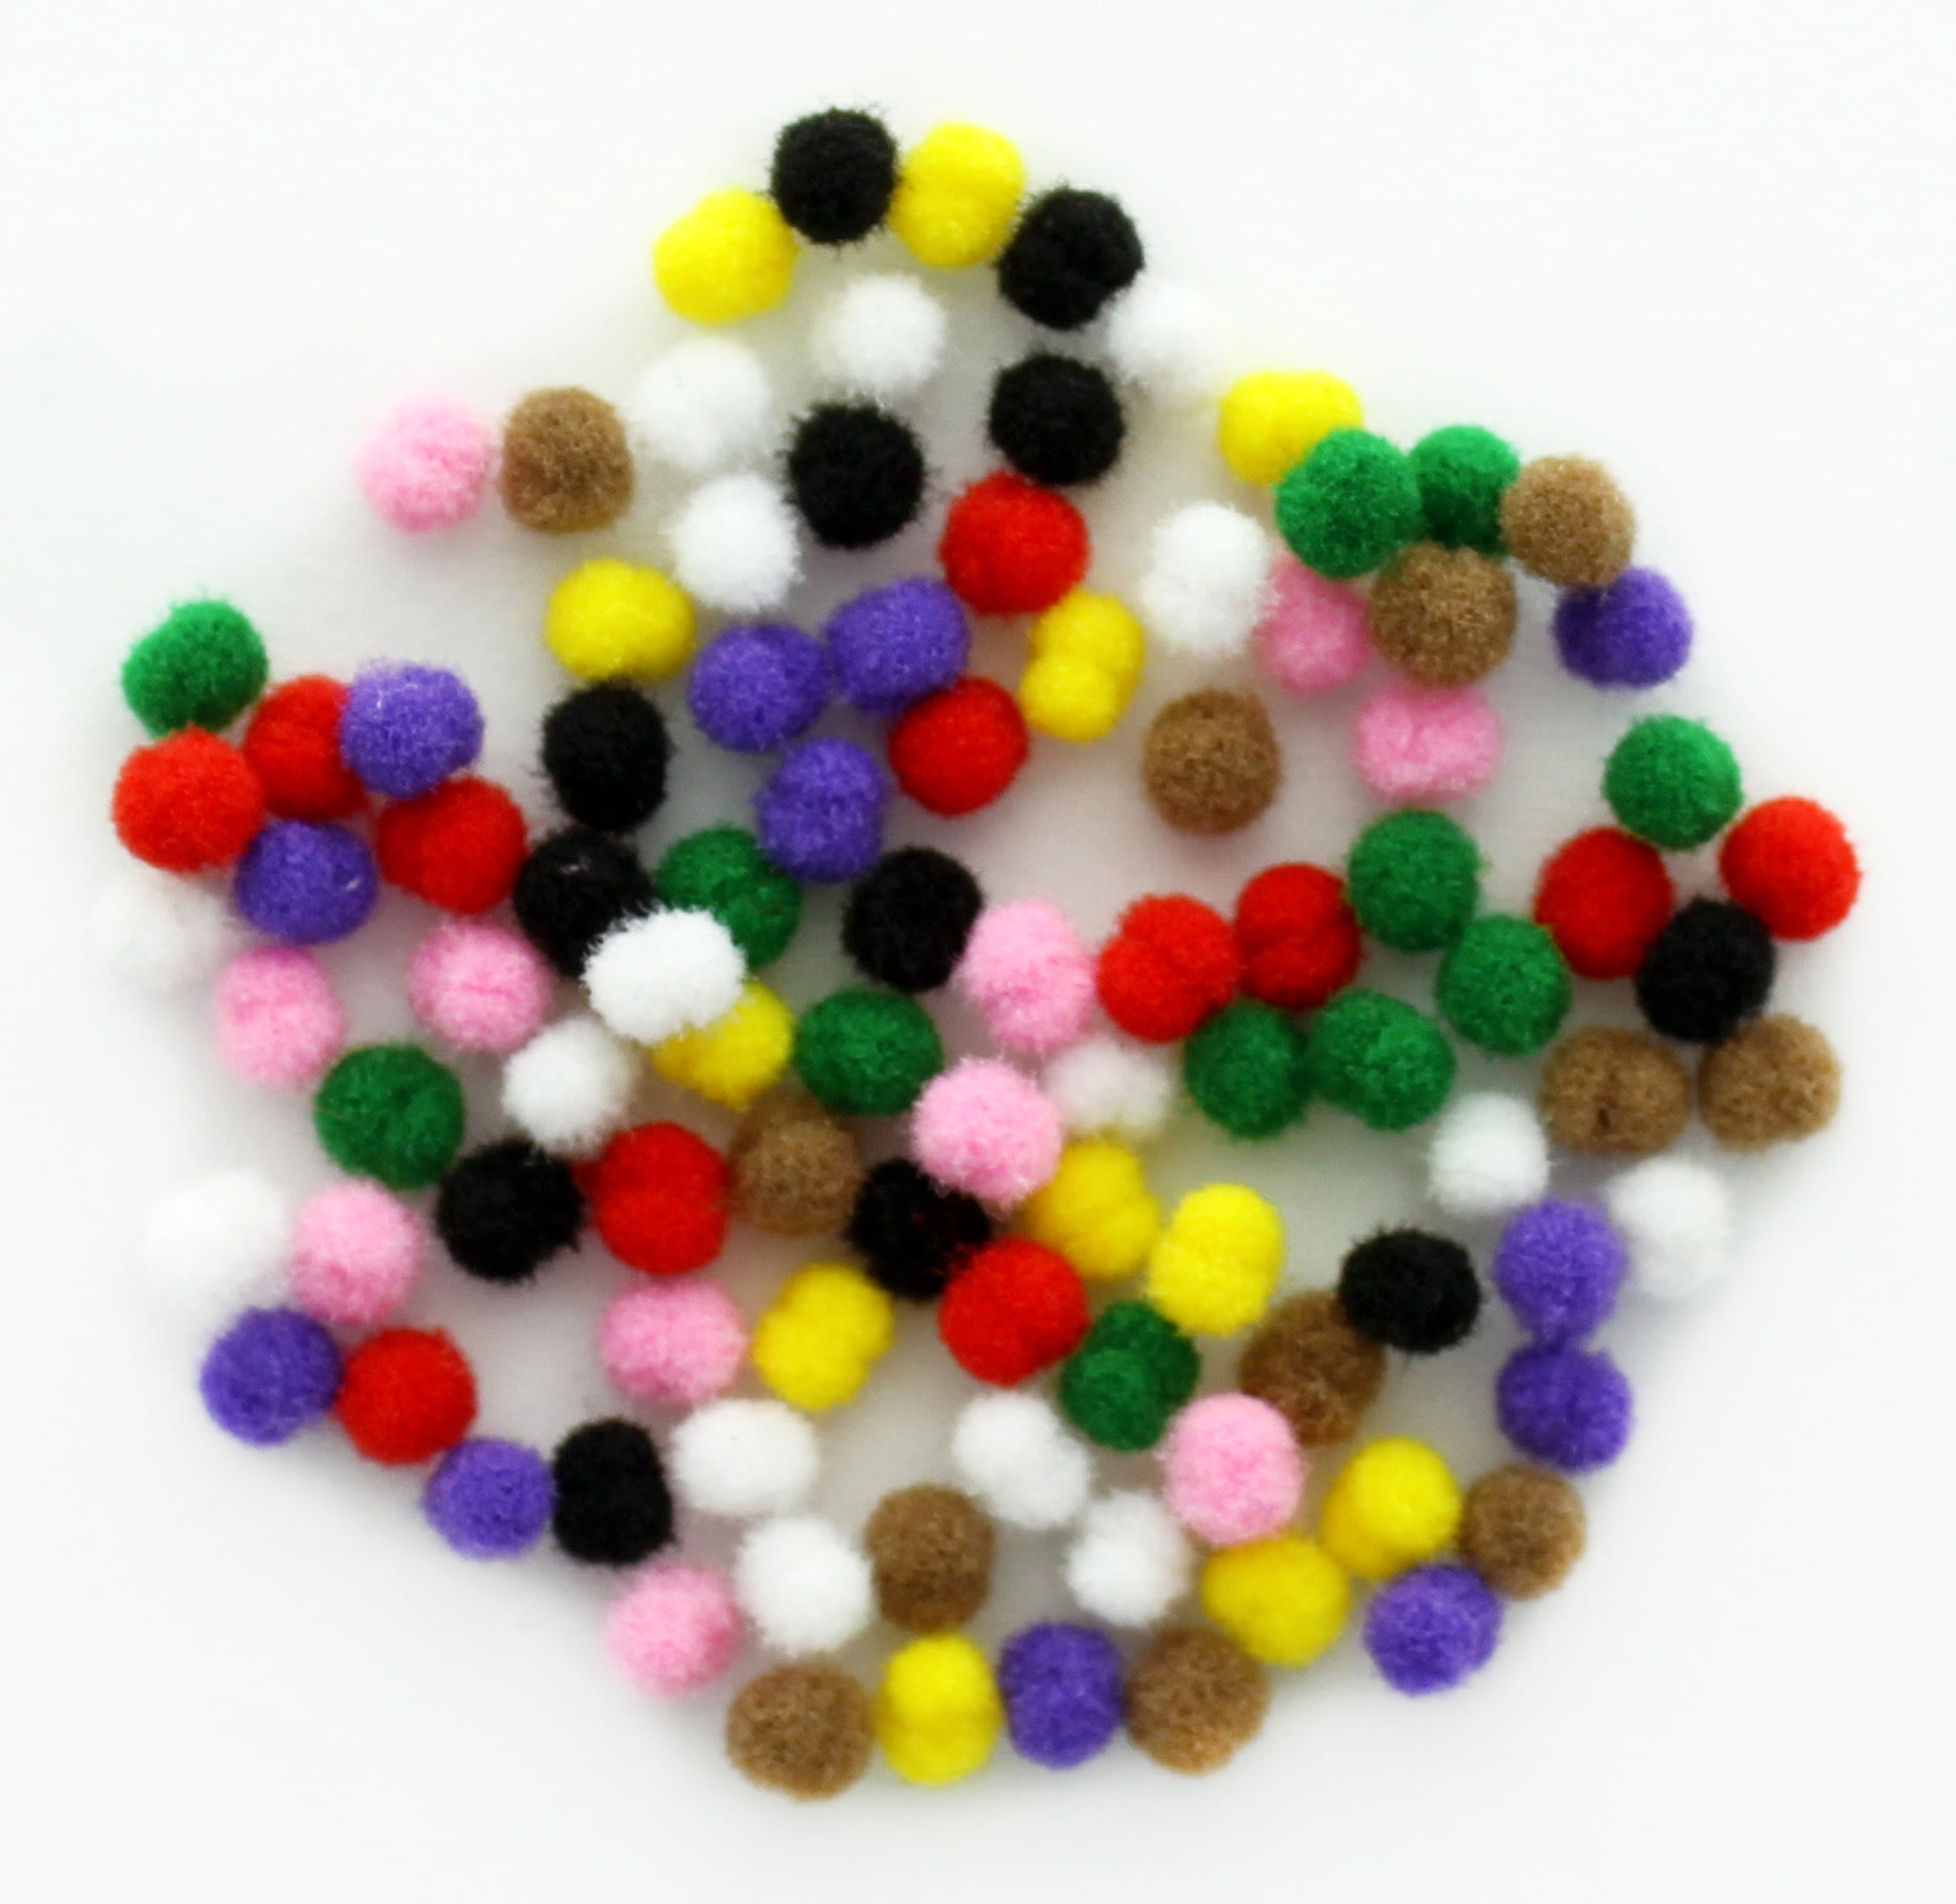 Essentials by Leisure Arts Yarn Pom Poms - Assorted Pastel - 1 to 1.5 -  20 piece pom poms arts and crafts - gray pompoms for crafts - craft pom  poms - puff balls for crafts 